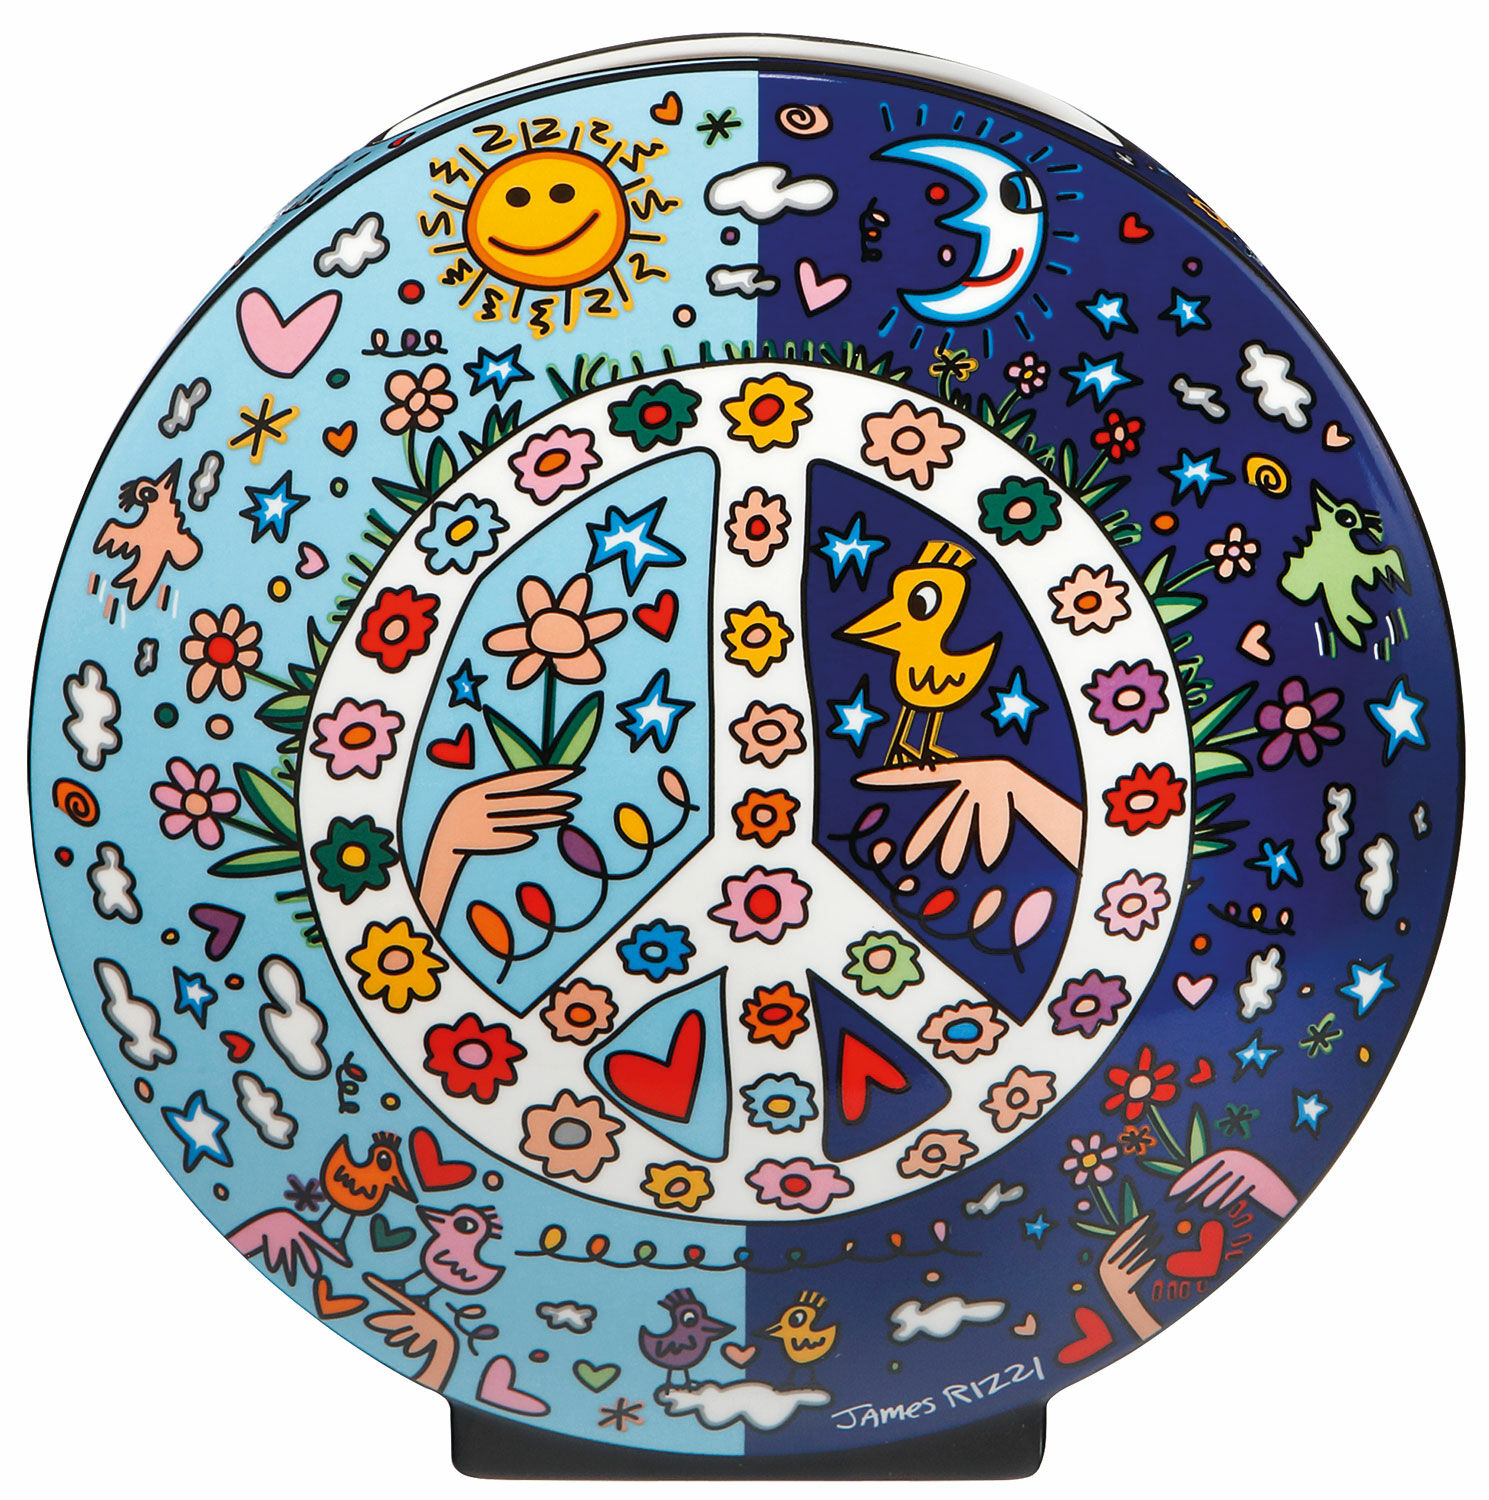 Porcelain vase "Give Peace a Chance" by James Rizzi